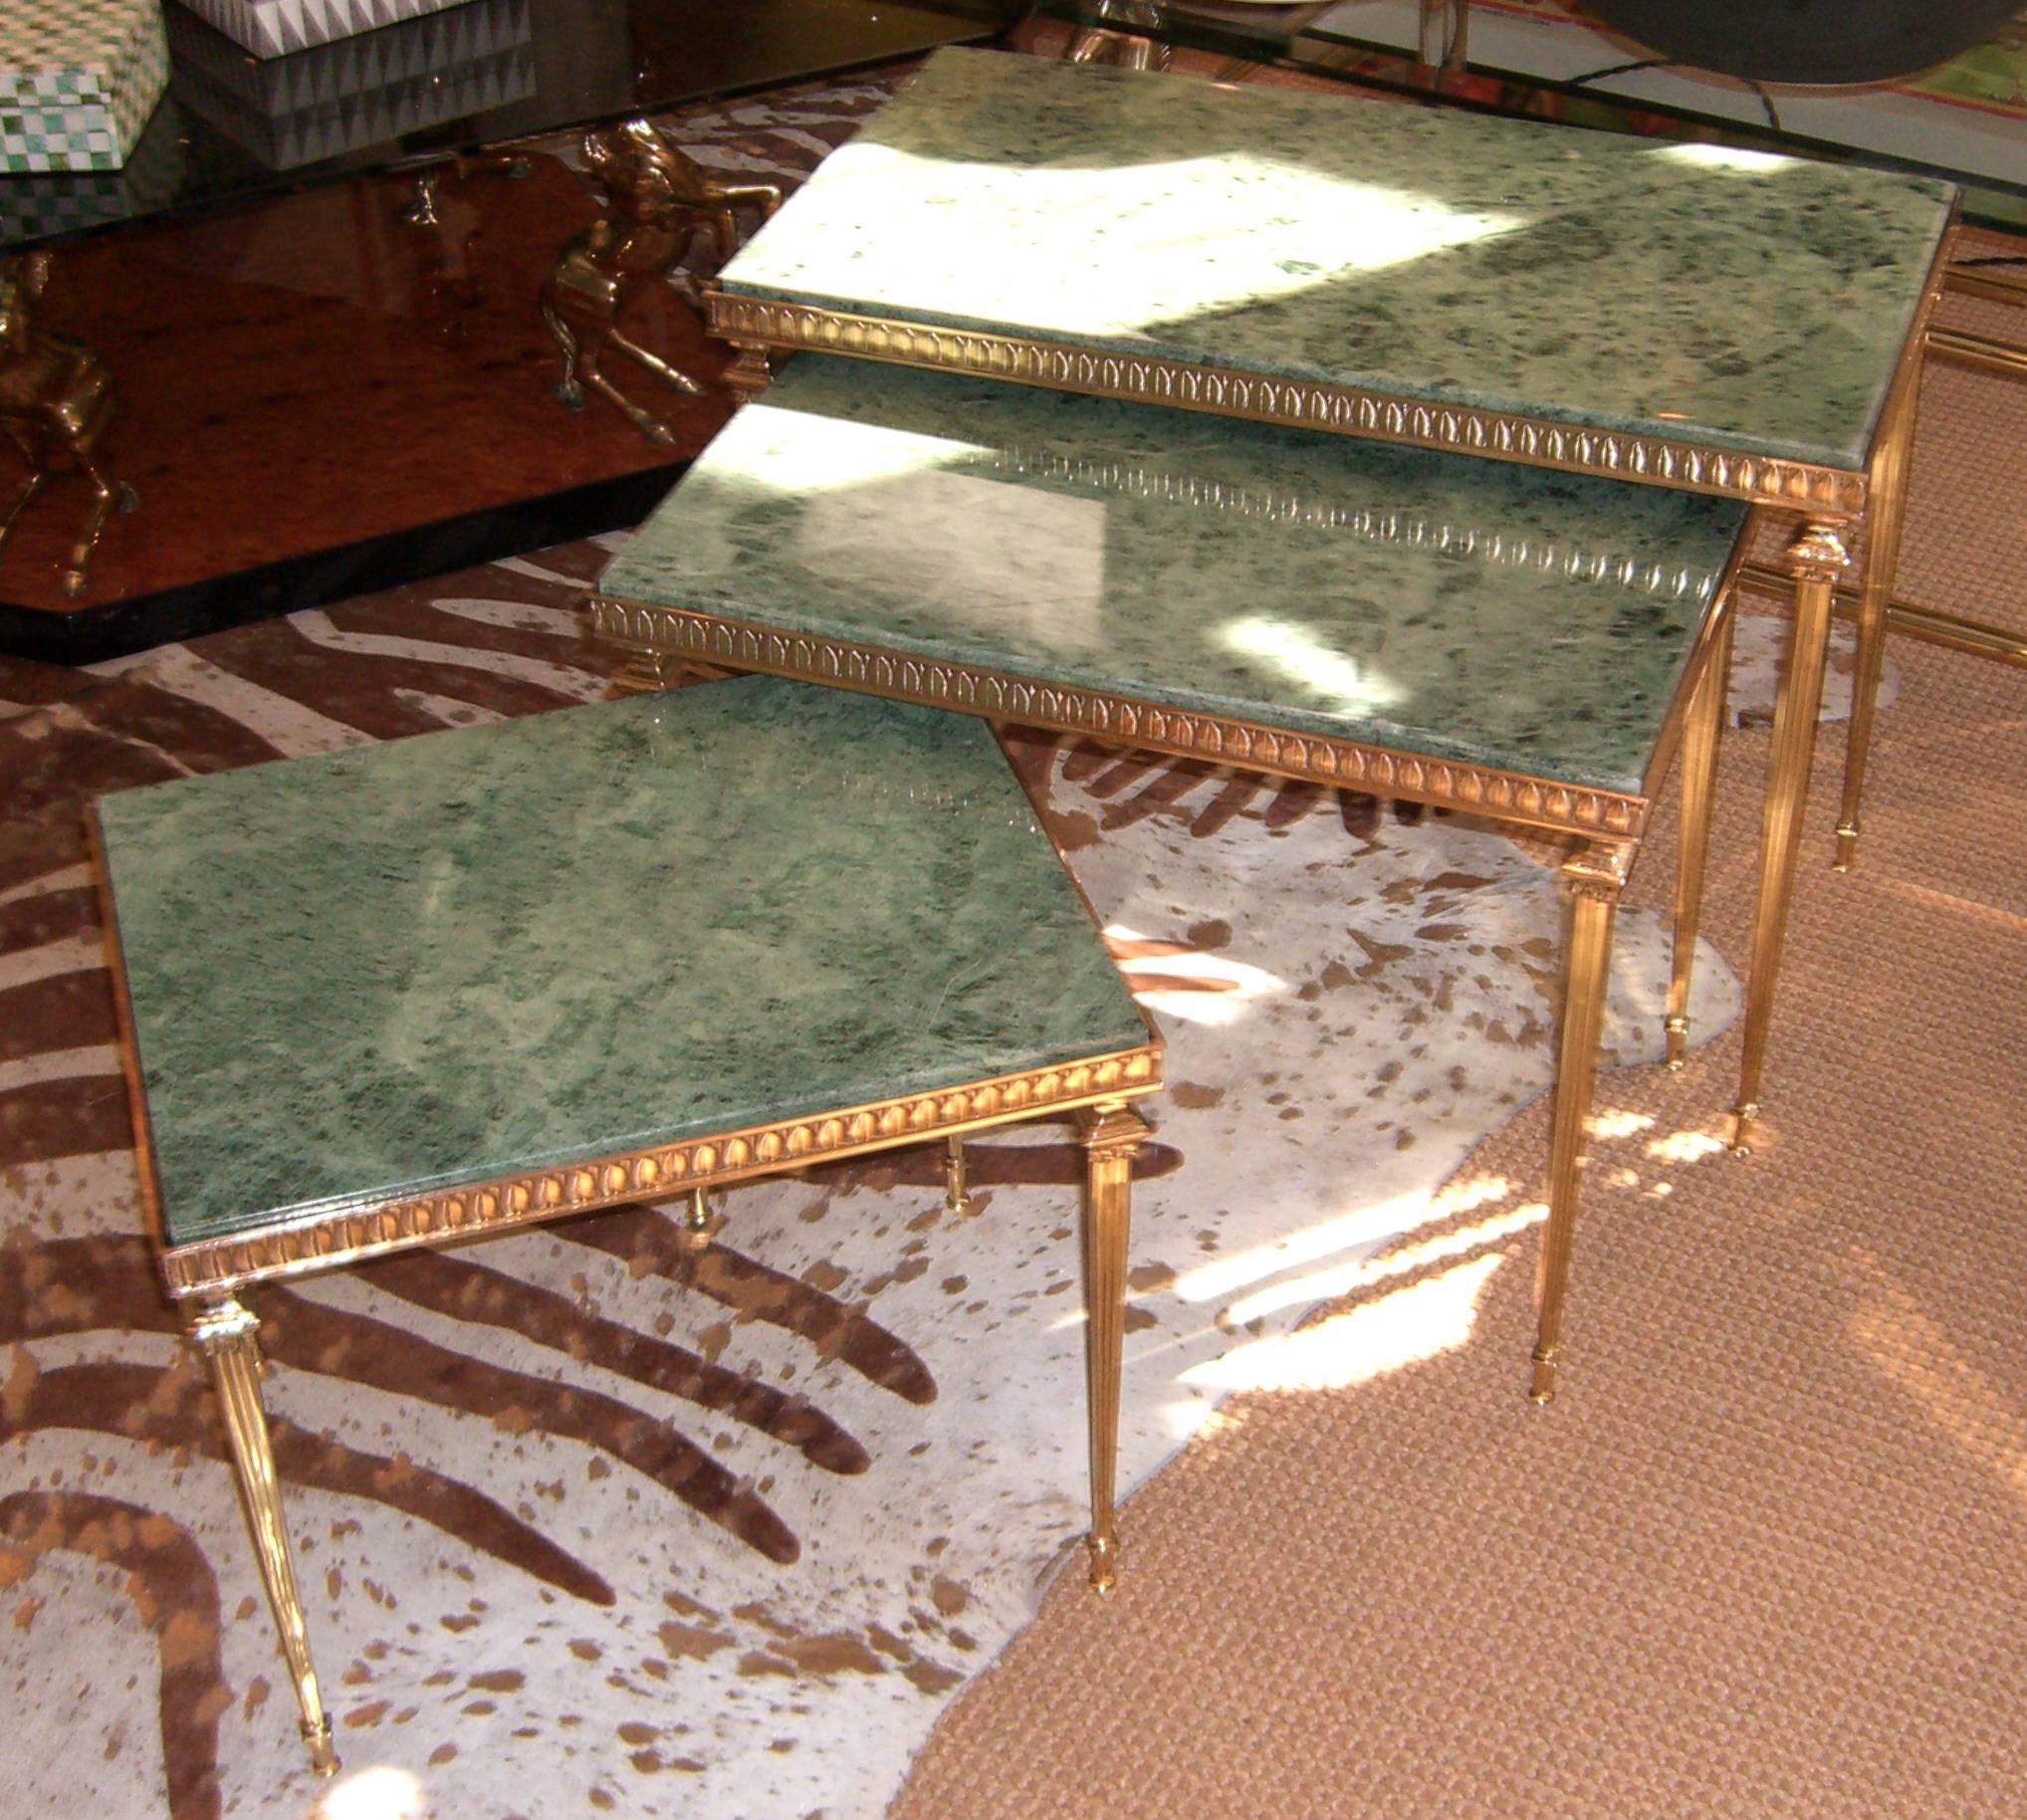 A group of three rectangular nesting tables. The bases are polished and lacquered brass with a delicate leaf design and decorative neoclassic style legs. All tops are inset green marble with deeply shaded veining.